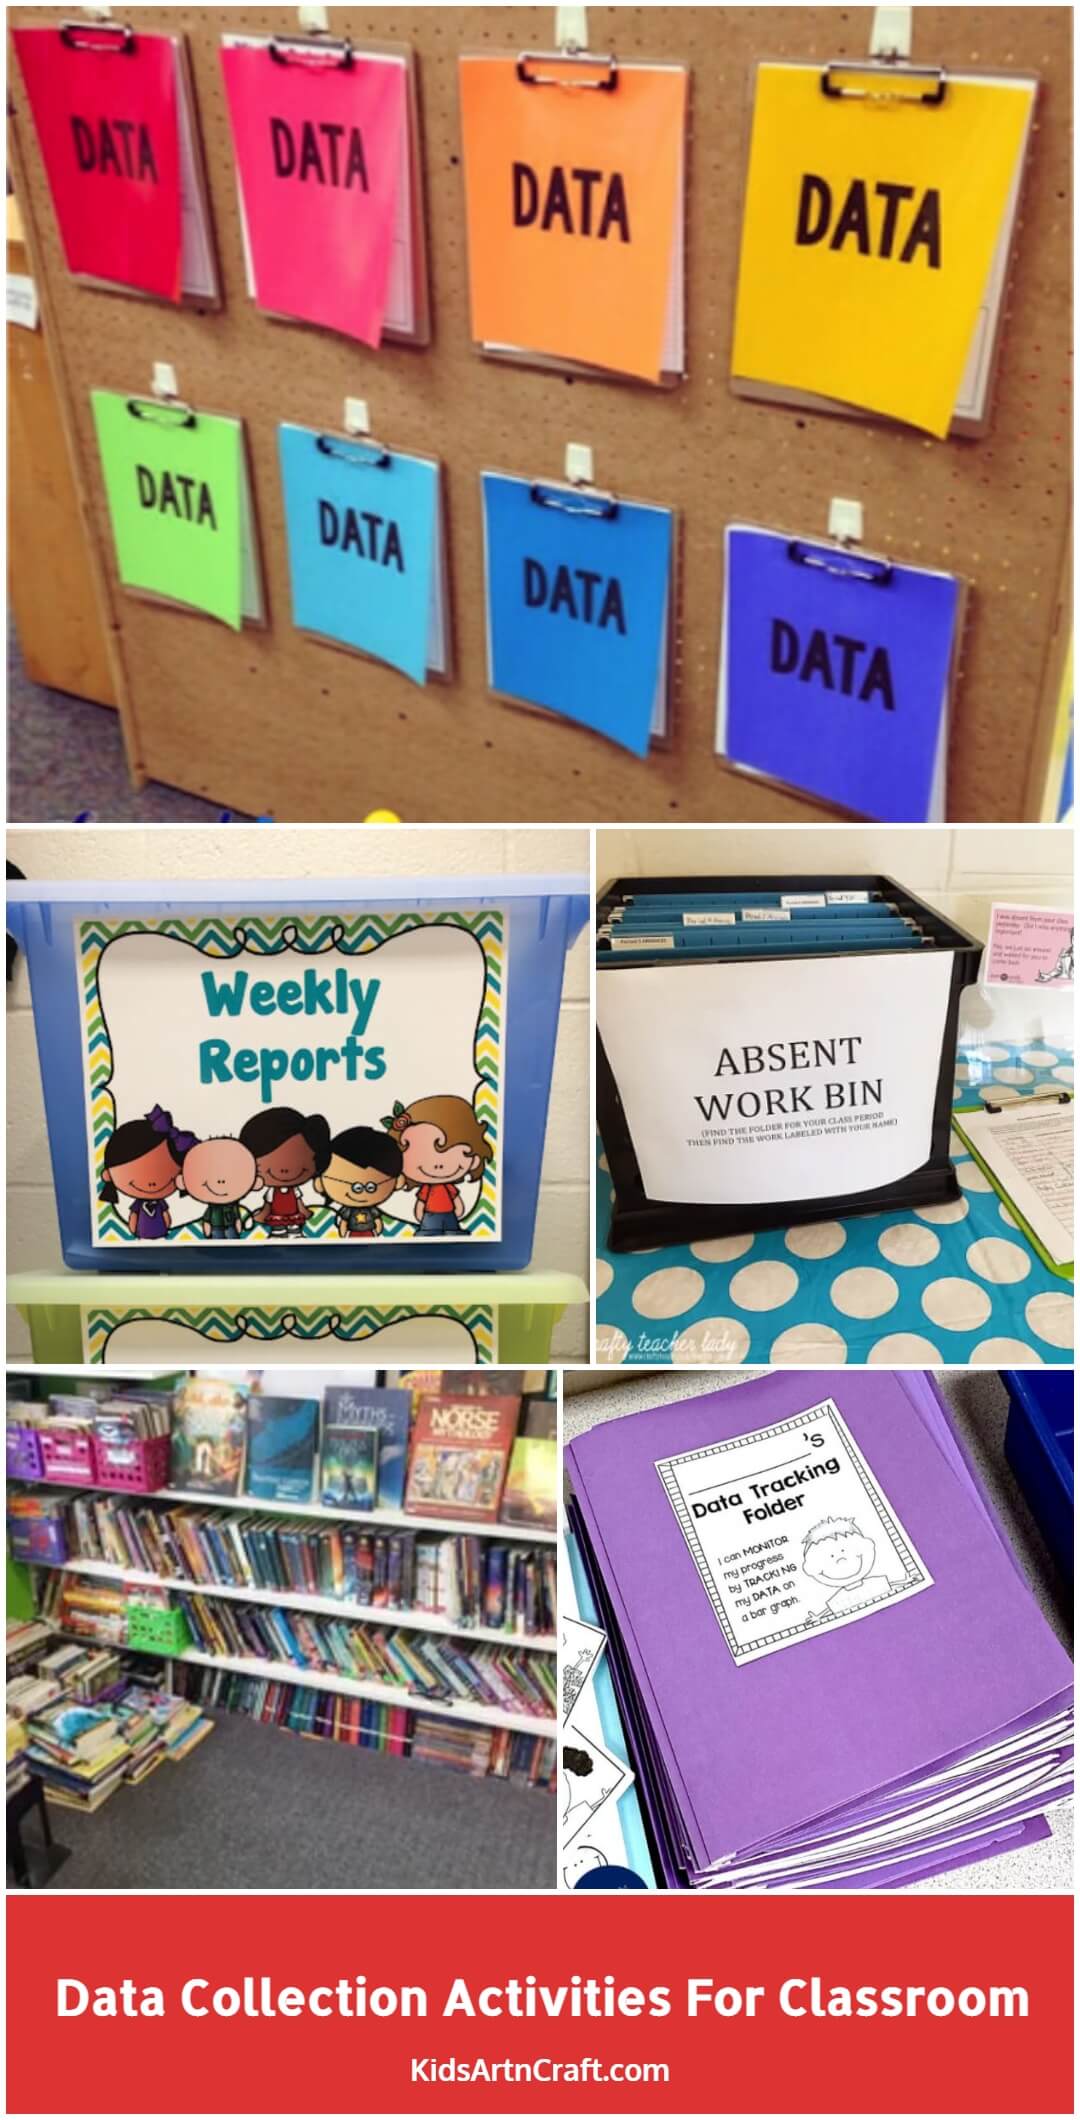 Data Collection Activities for Classroom